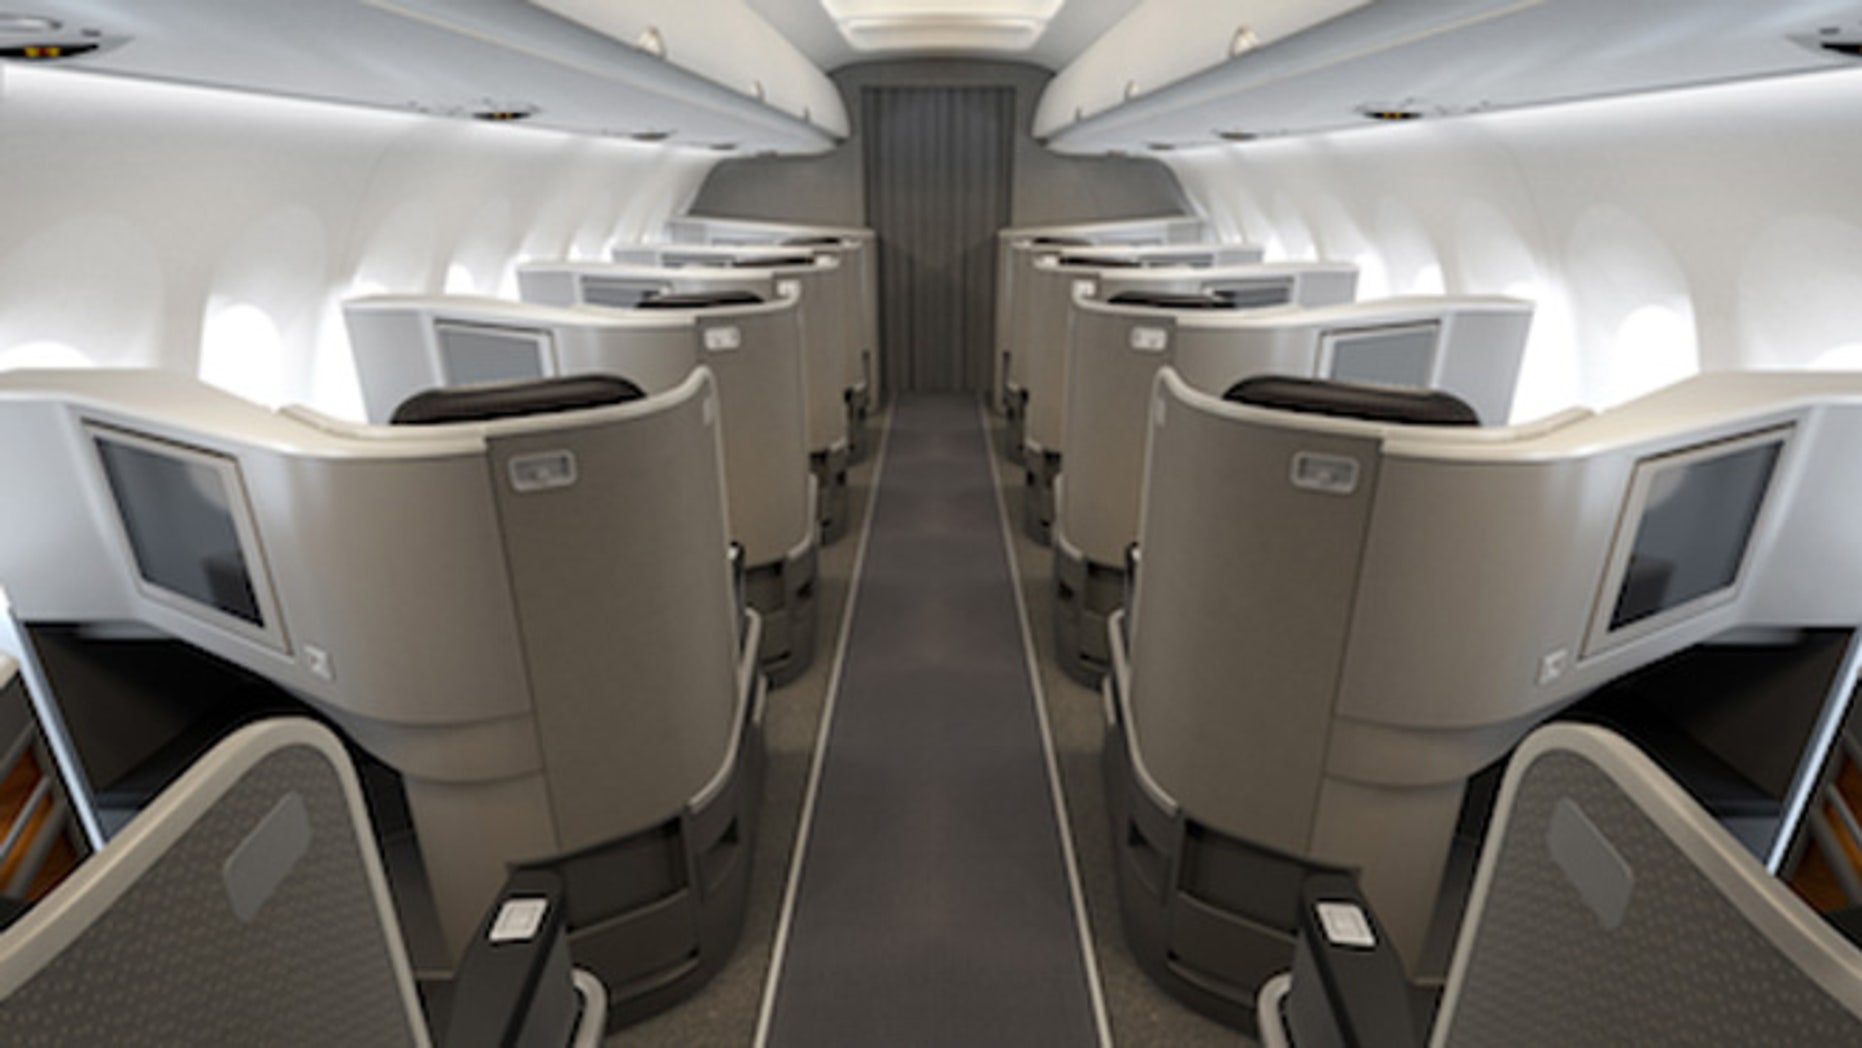 a-private-realm-american-airlines-new-transcontinental-service-in